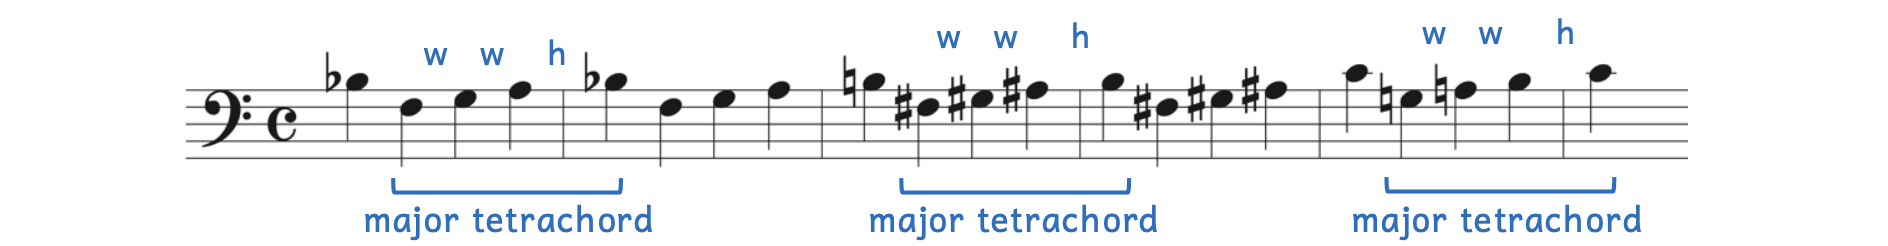 Major tetrachords in the baseball cheer. The first major tetrachord is F, G, A, B-flat. The second major tetrachord is F-sharp, G-sharp, A-sharp, B. The third major tetrachord is G, A, B, C.